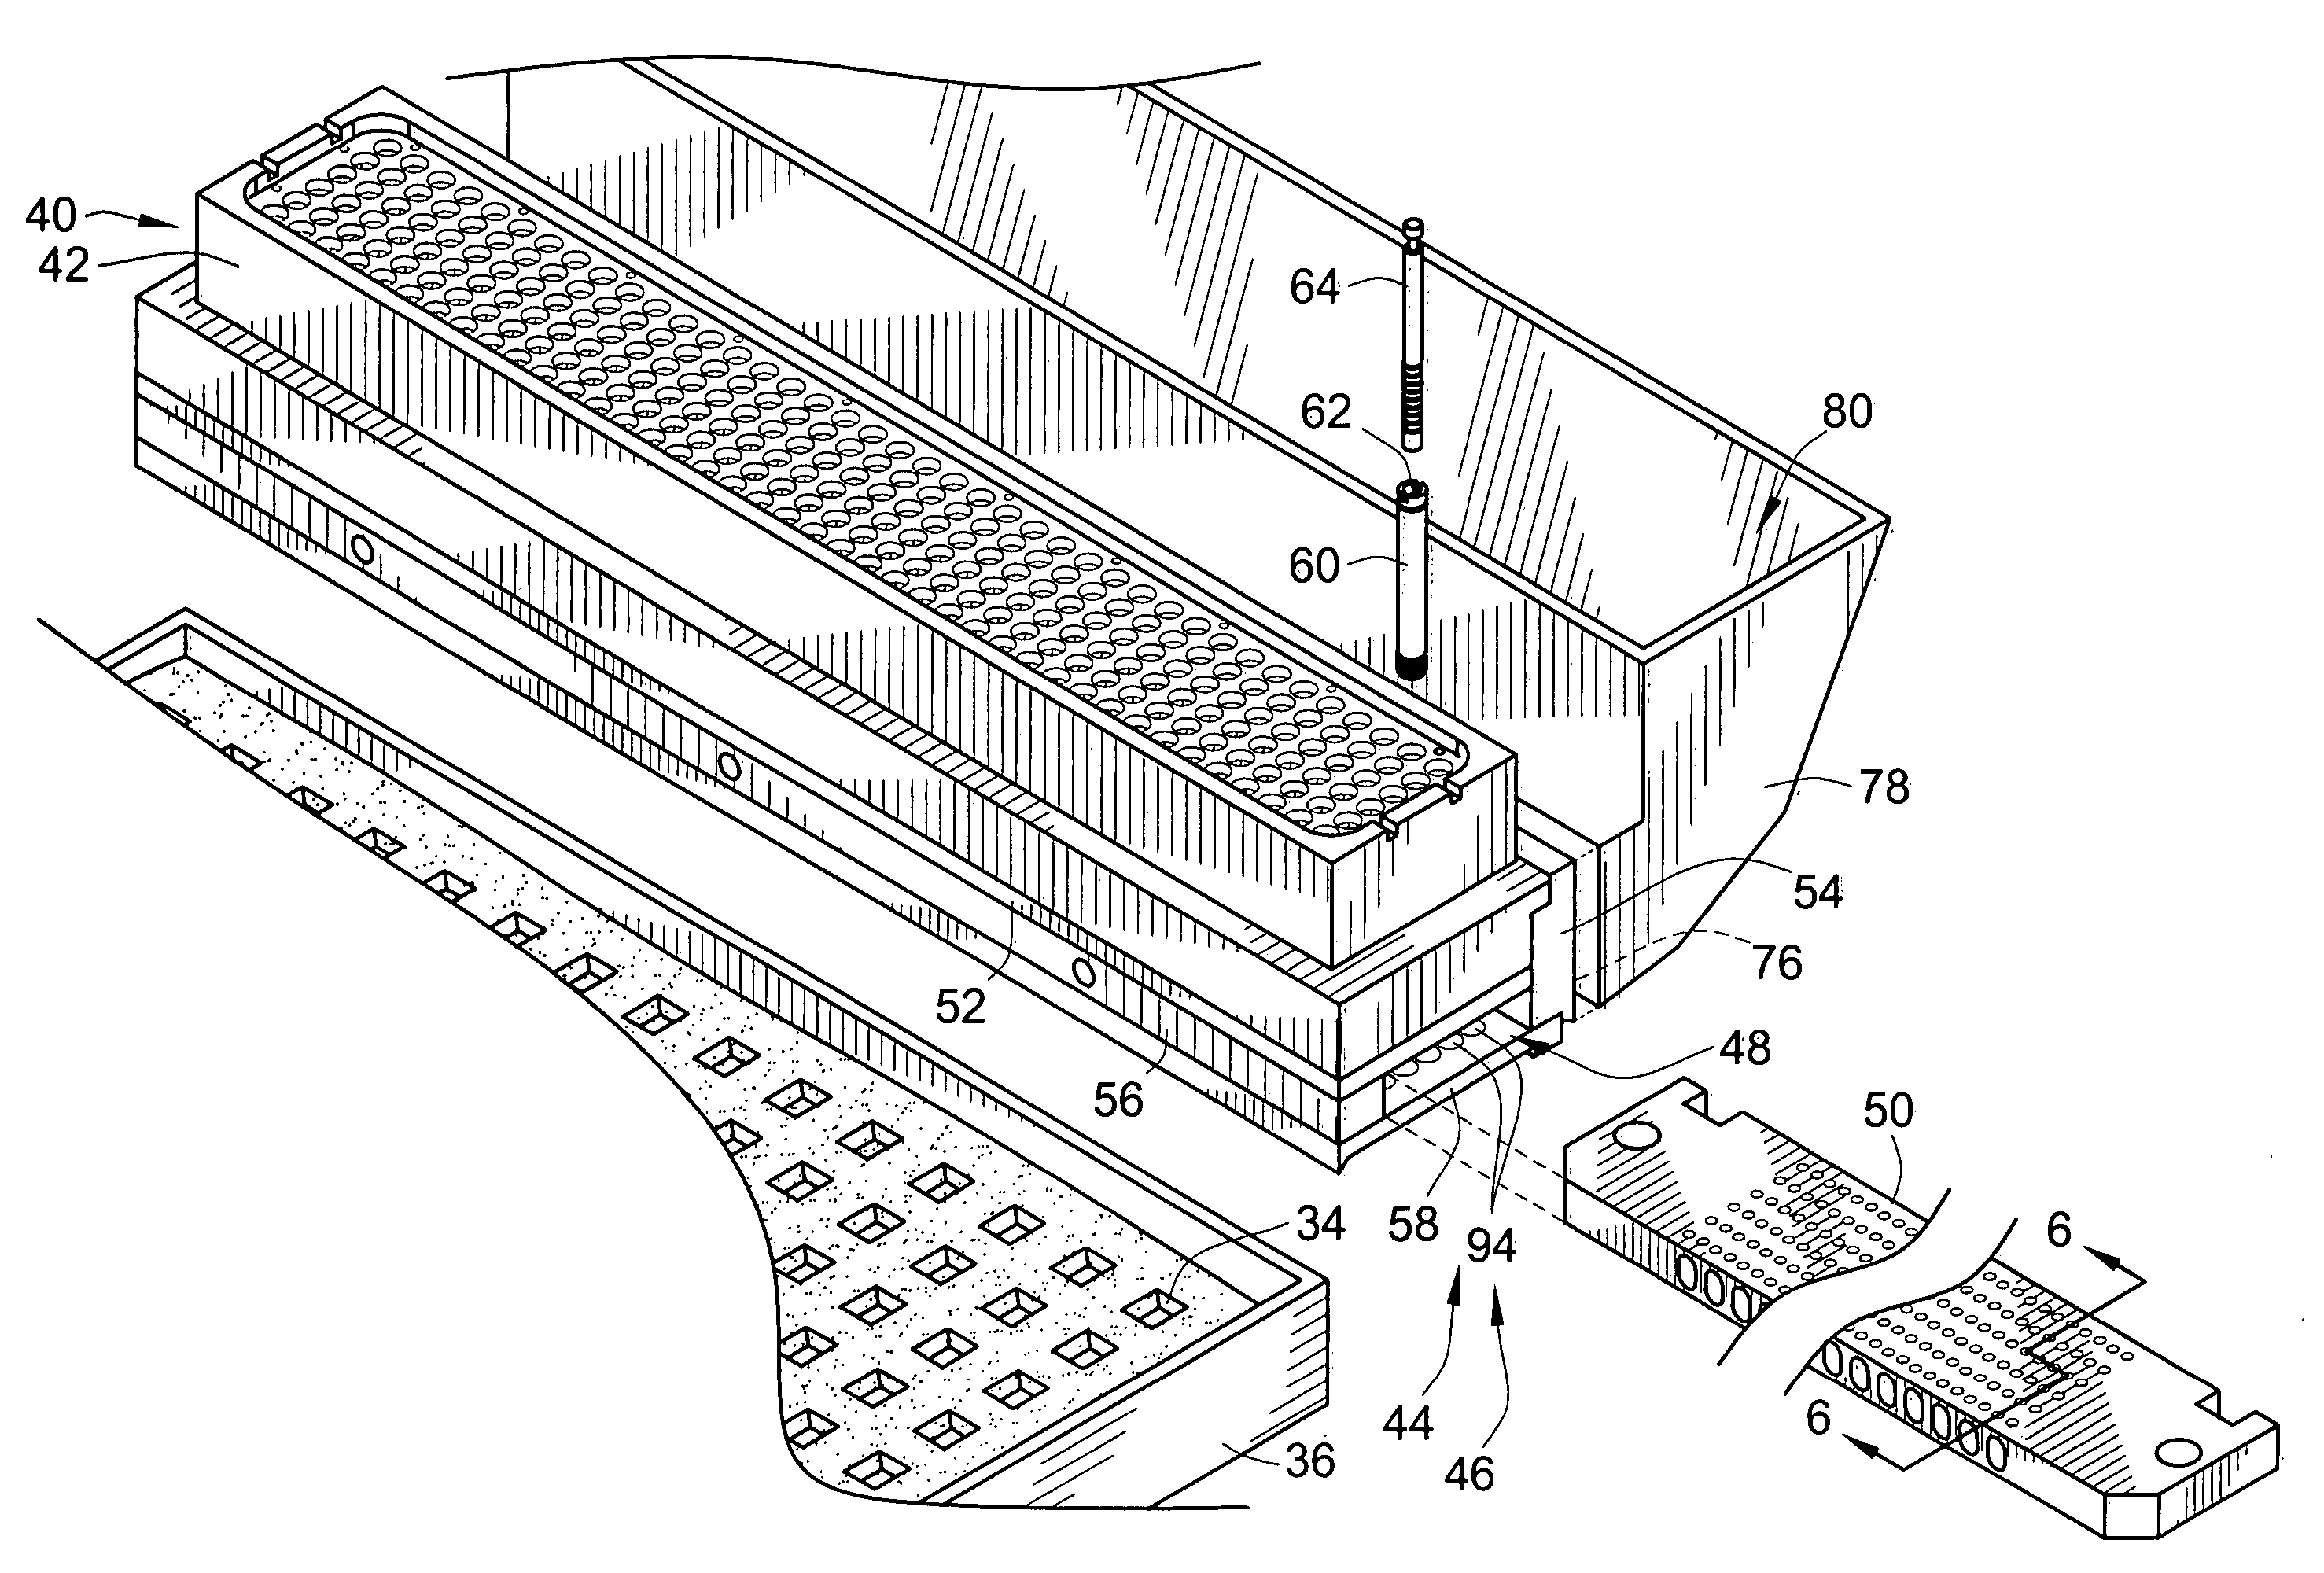 Depositor pump, having a modular valve apparatus, for manufacturing starch molded products such as candy